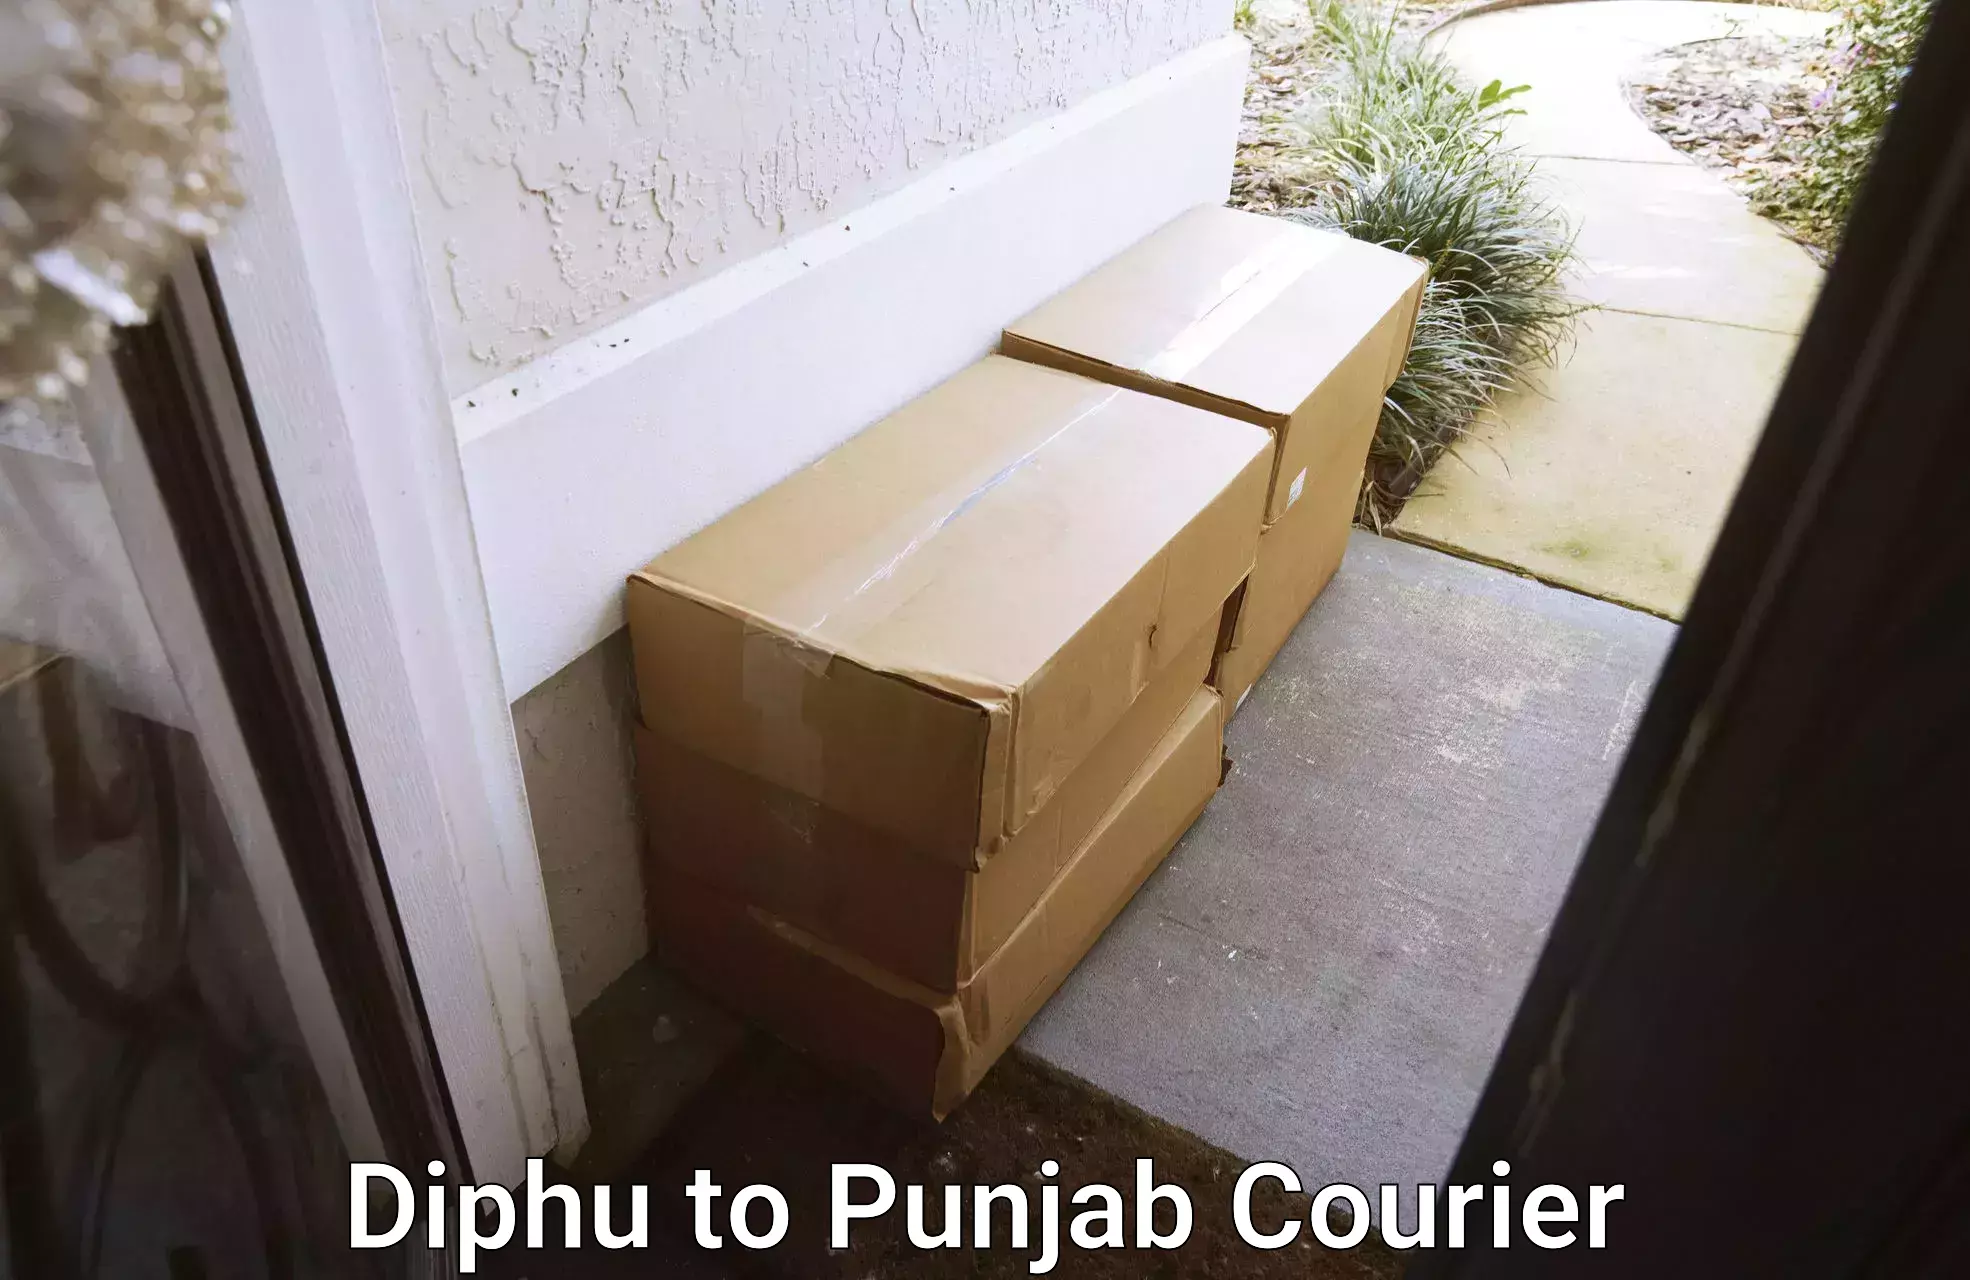 Courier service partnerships in Diphu to Nawanshahr